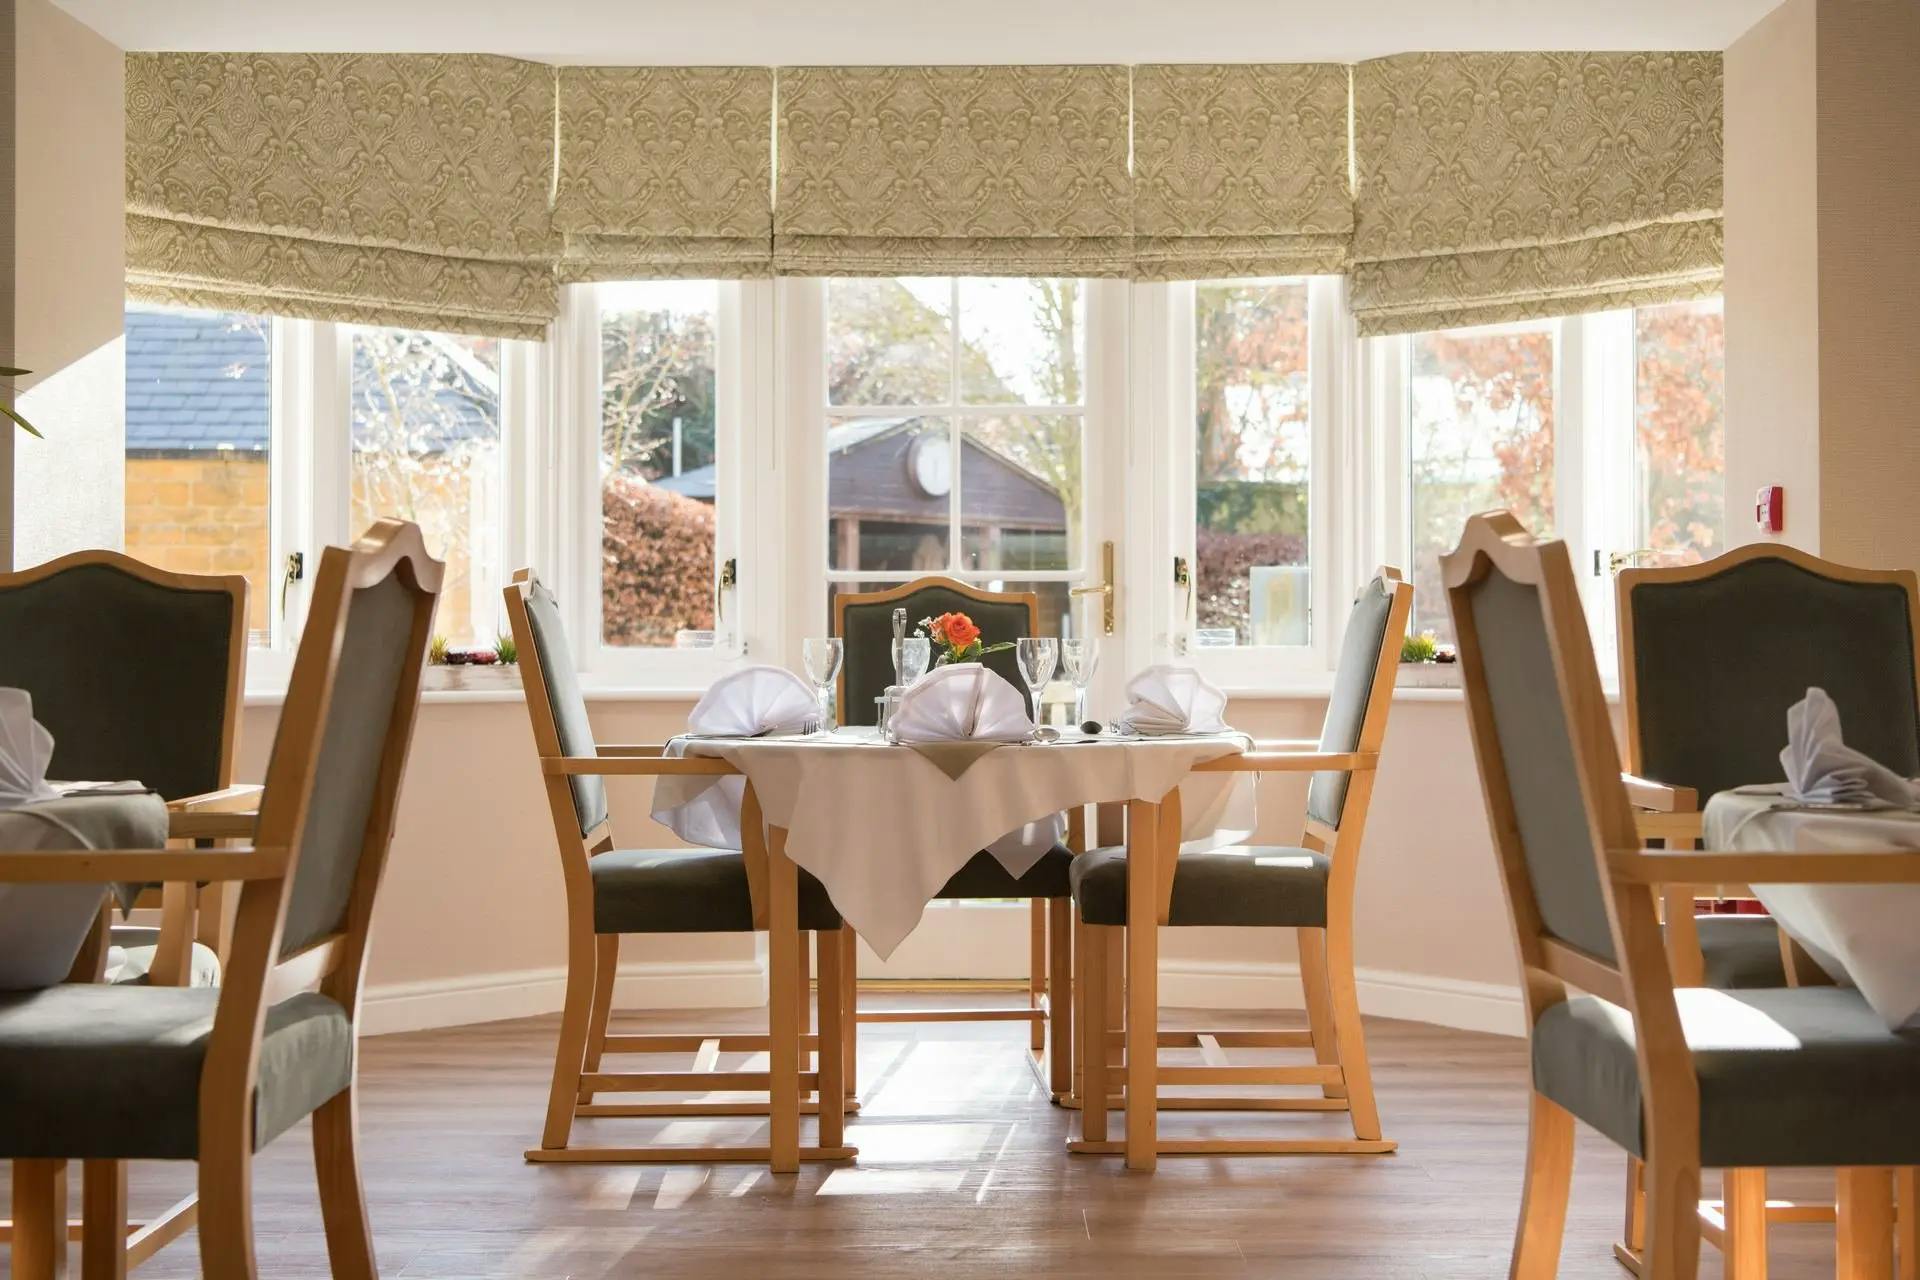 Dining room of Mill house care home in Chipping Campden